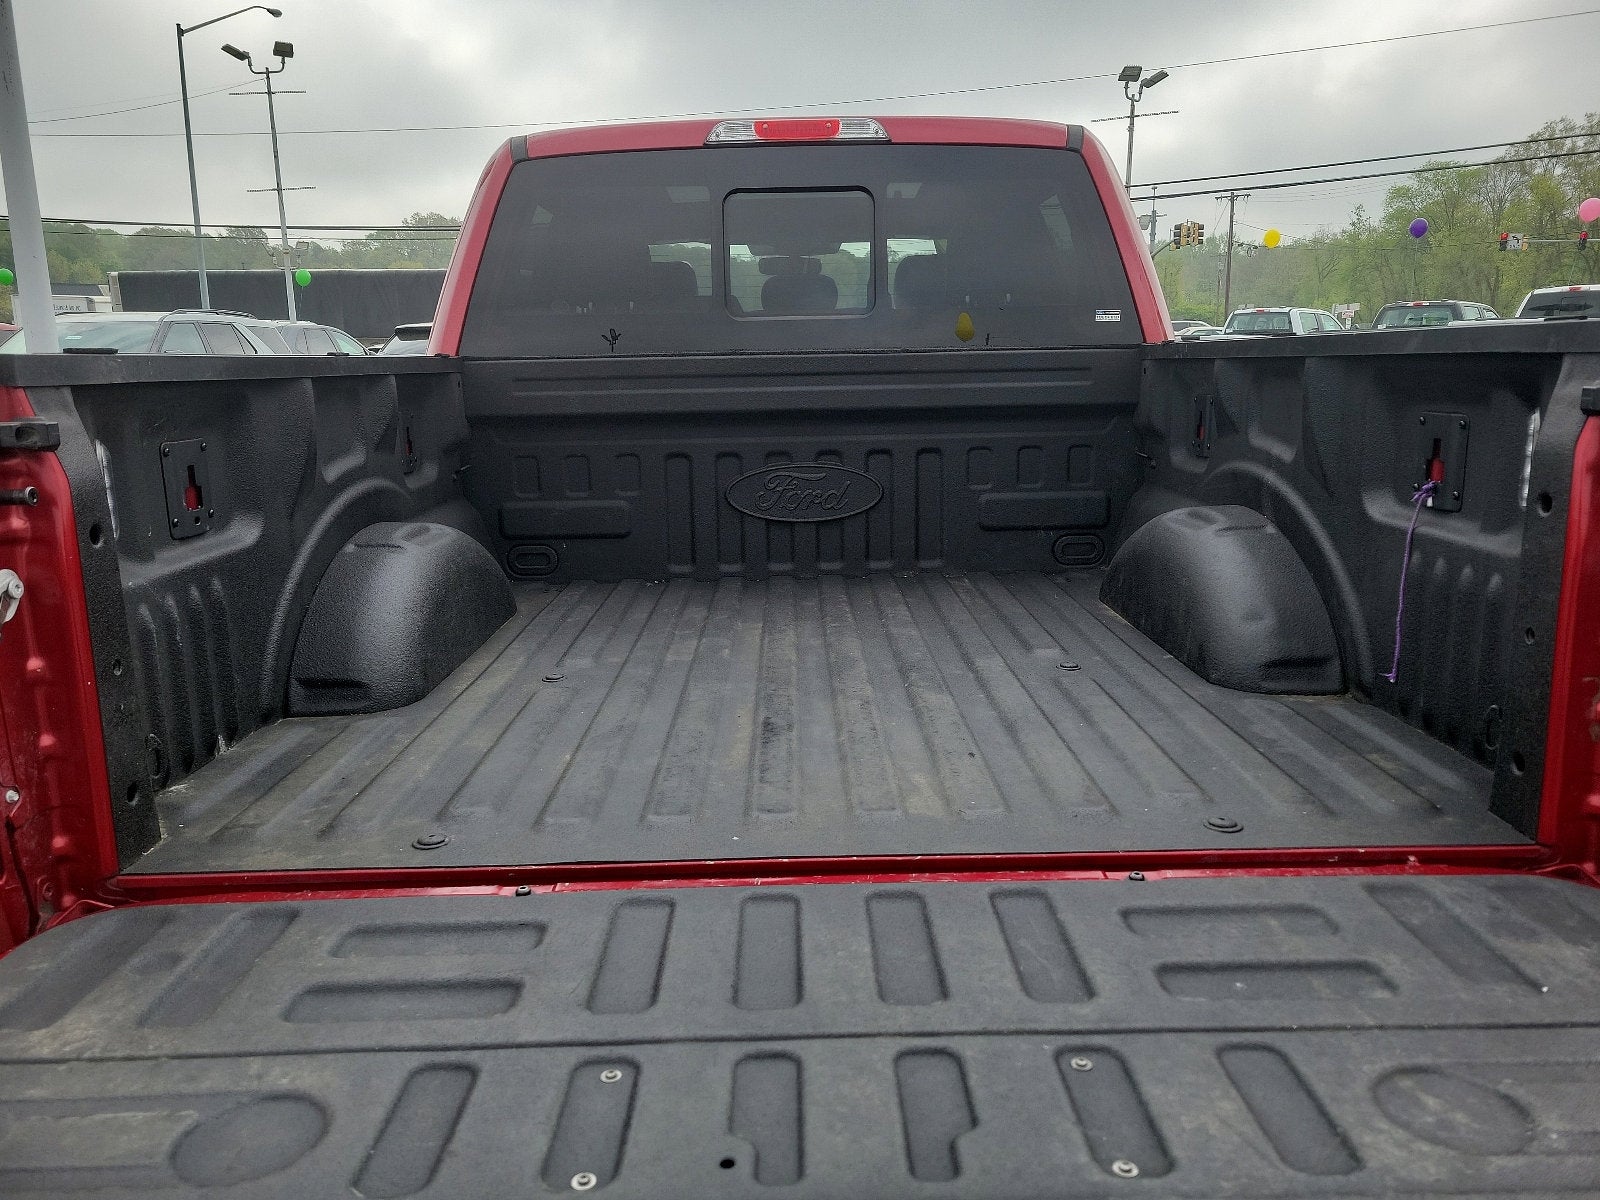 2019 Ford F-150 4WD